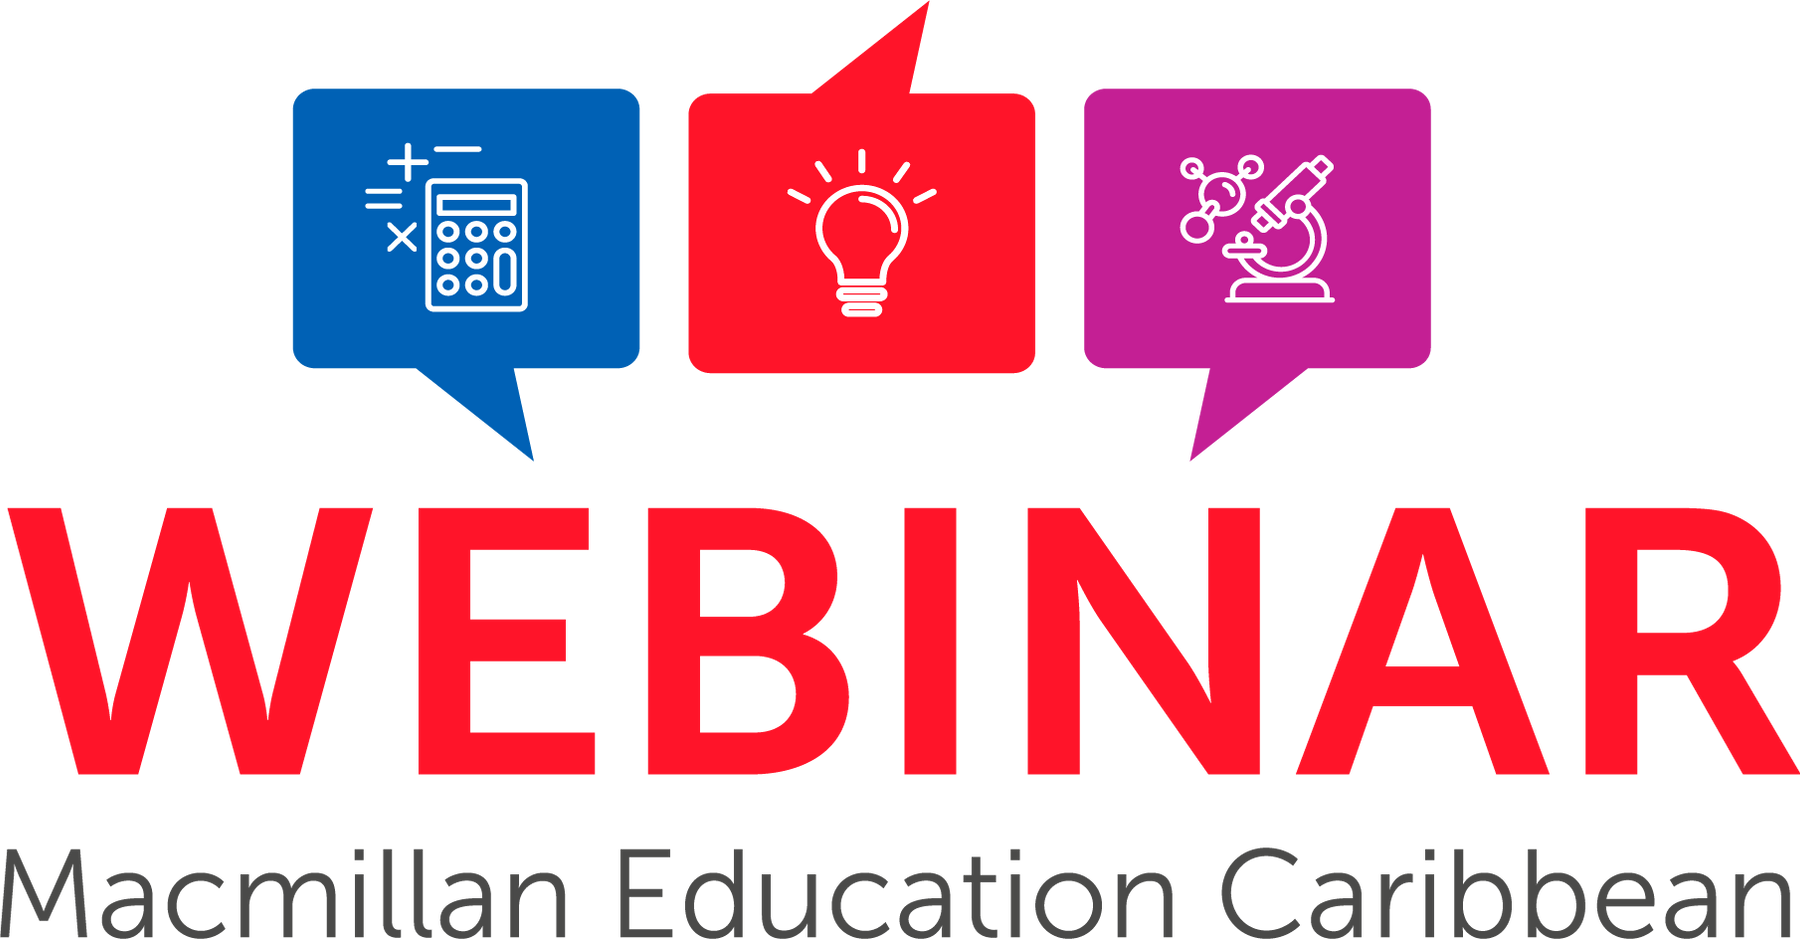 Join our Autumn Series of Webinars